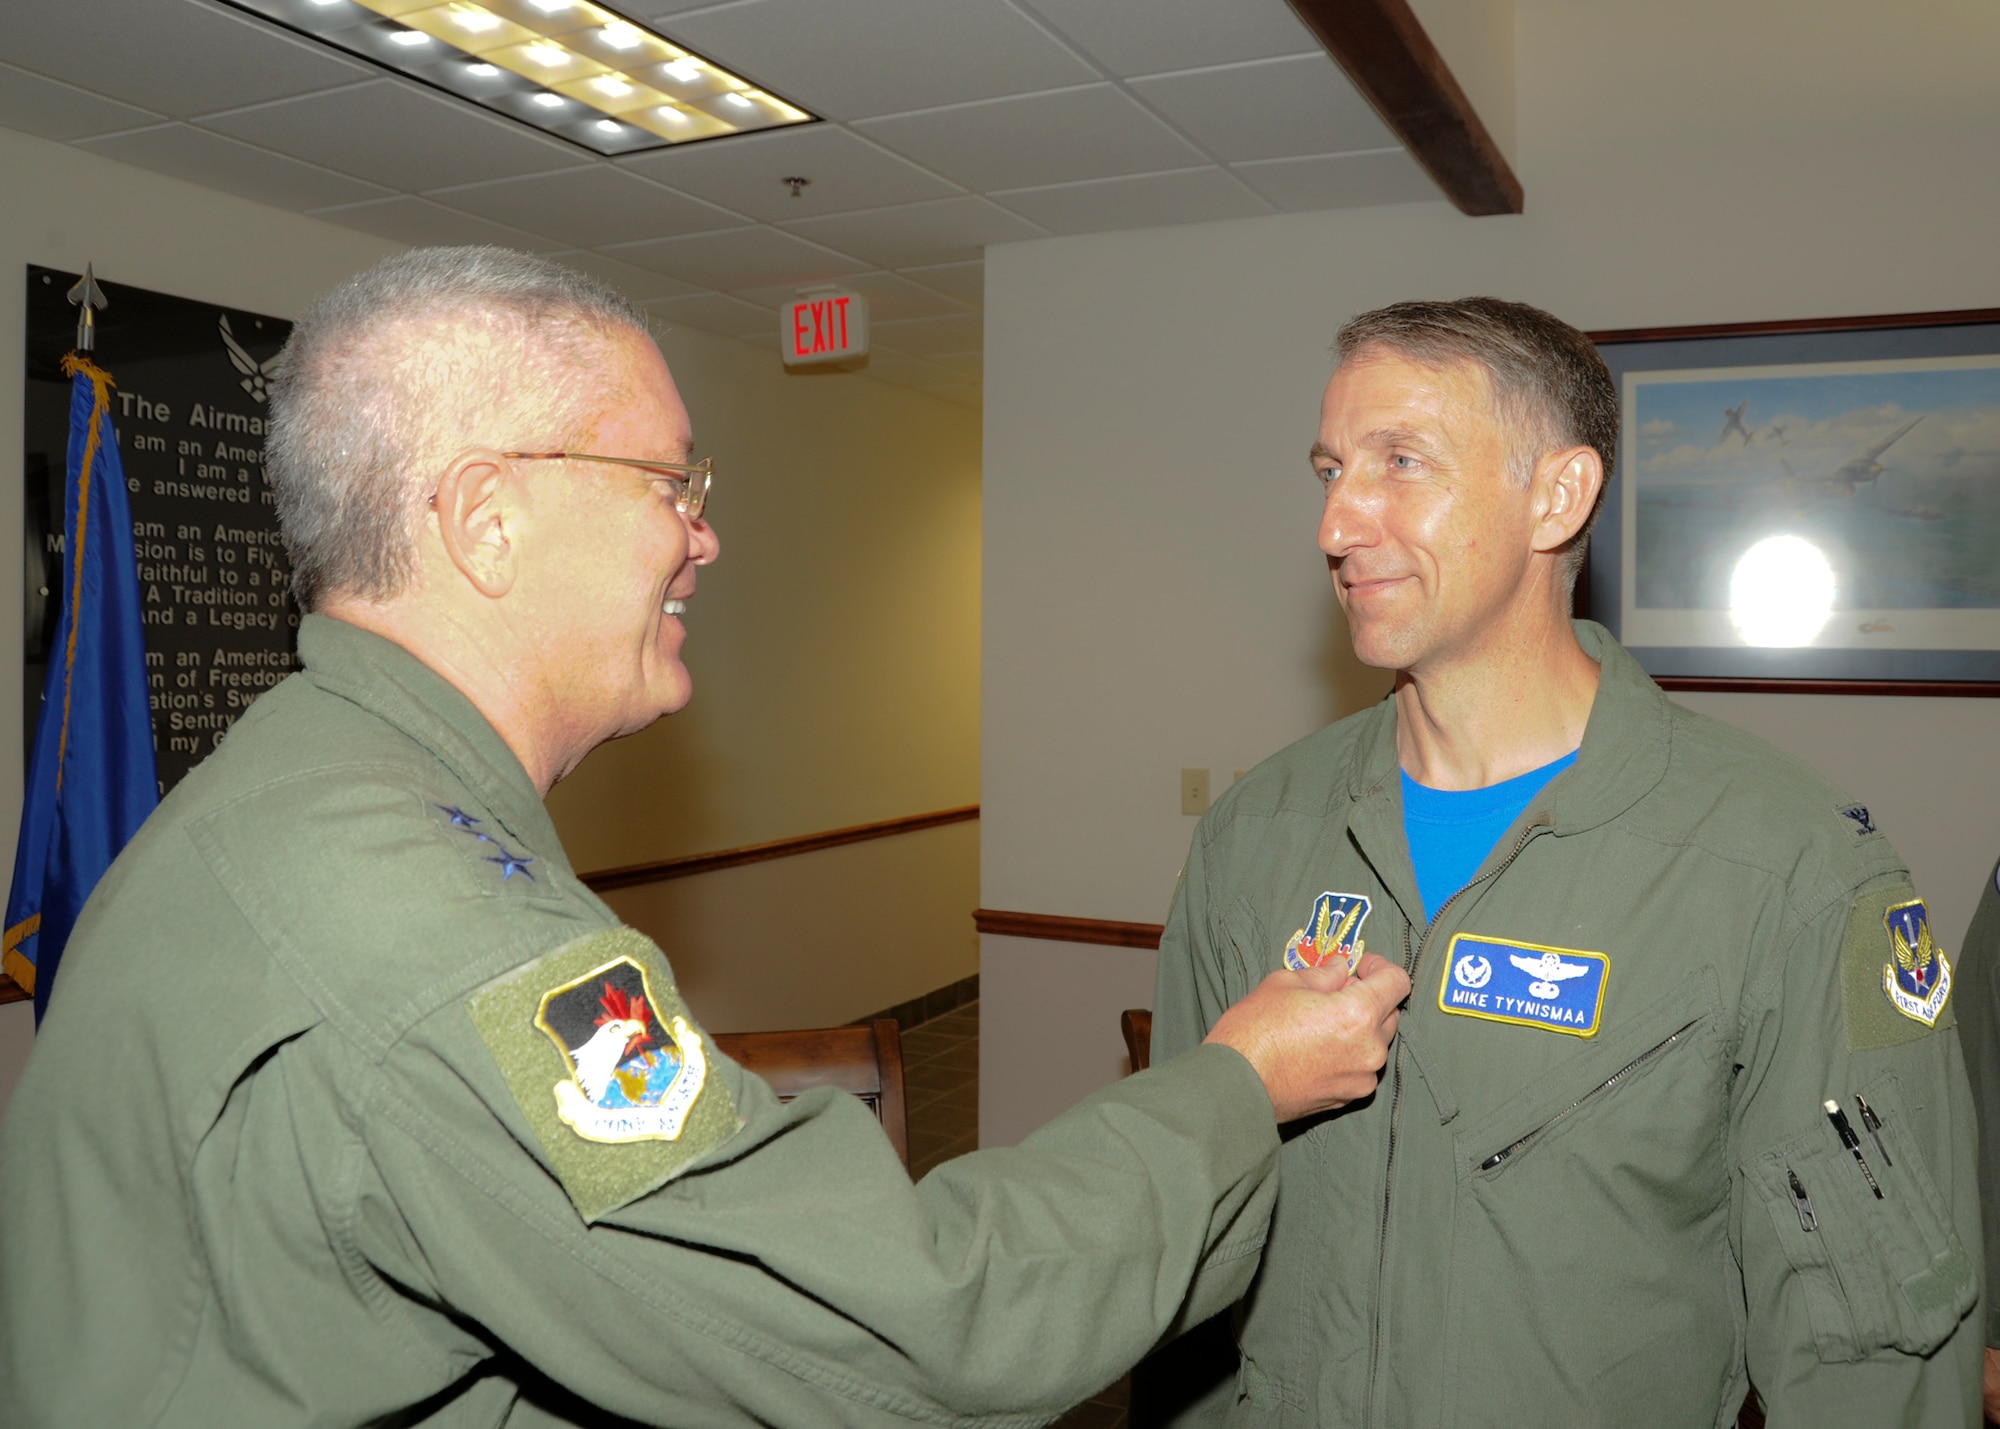 As part of the Transfer of Authority ceremony held today to recognize the realignment of the Civil Air Patrol-U.S. Air Force – or CAP-USAF – from Air Education and Training Command to Air Combat Command, Lt. Gen. William Etter, commander of Continental U.S. NORAD Region-1st Air Force (Air Forces Northern) did a symbolic “patch swap” replacing the Air Education and Training Command and Air University patches for the new ACC and 1 AF patches on the uniform of  CAP-USAF commander, Col. Mike Tynismaa.